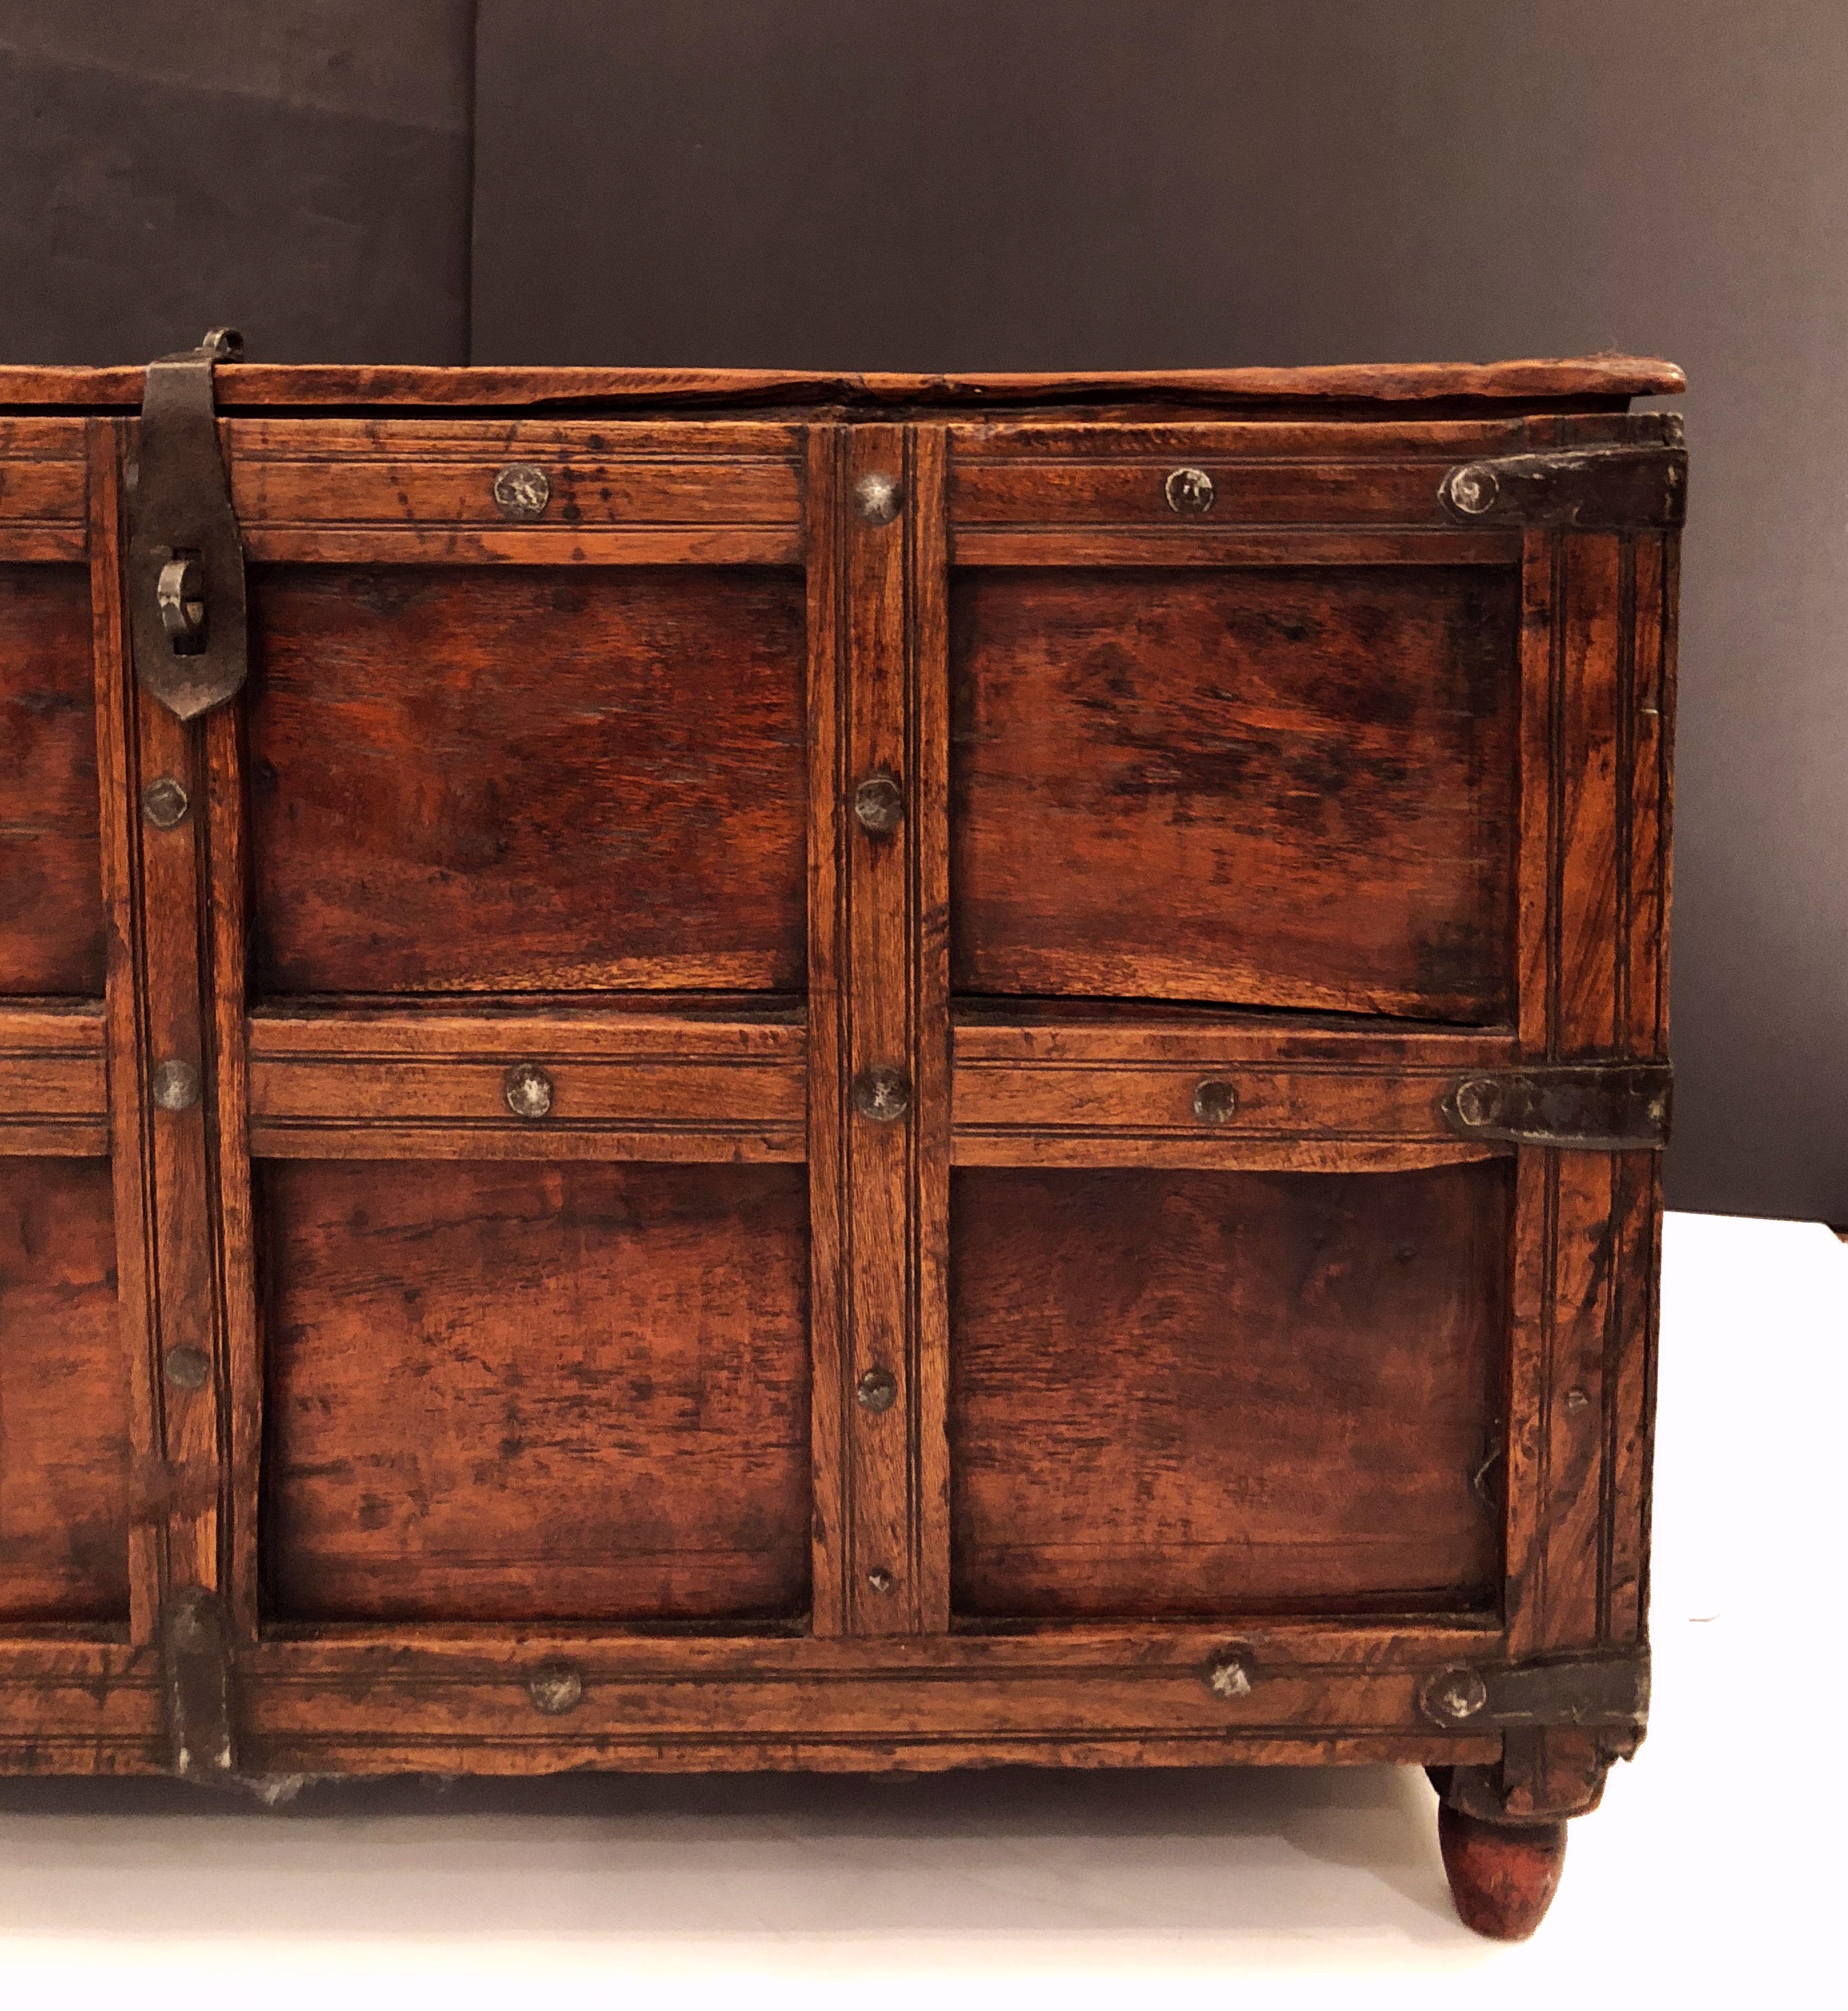 Iron-Bound Stick Box or Trunk from British Colonial India 'The Raj' 9